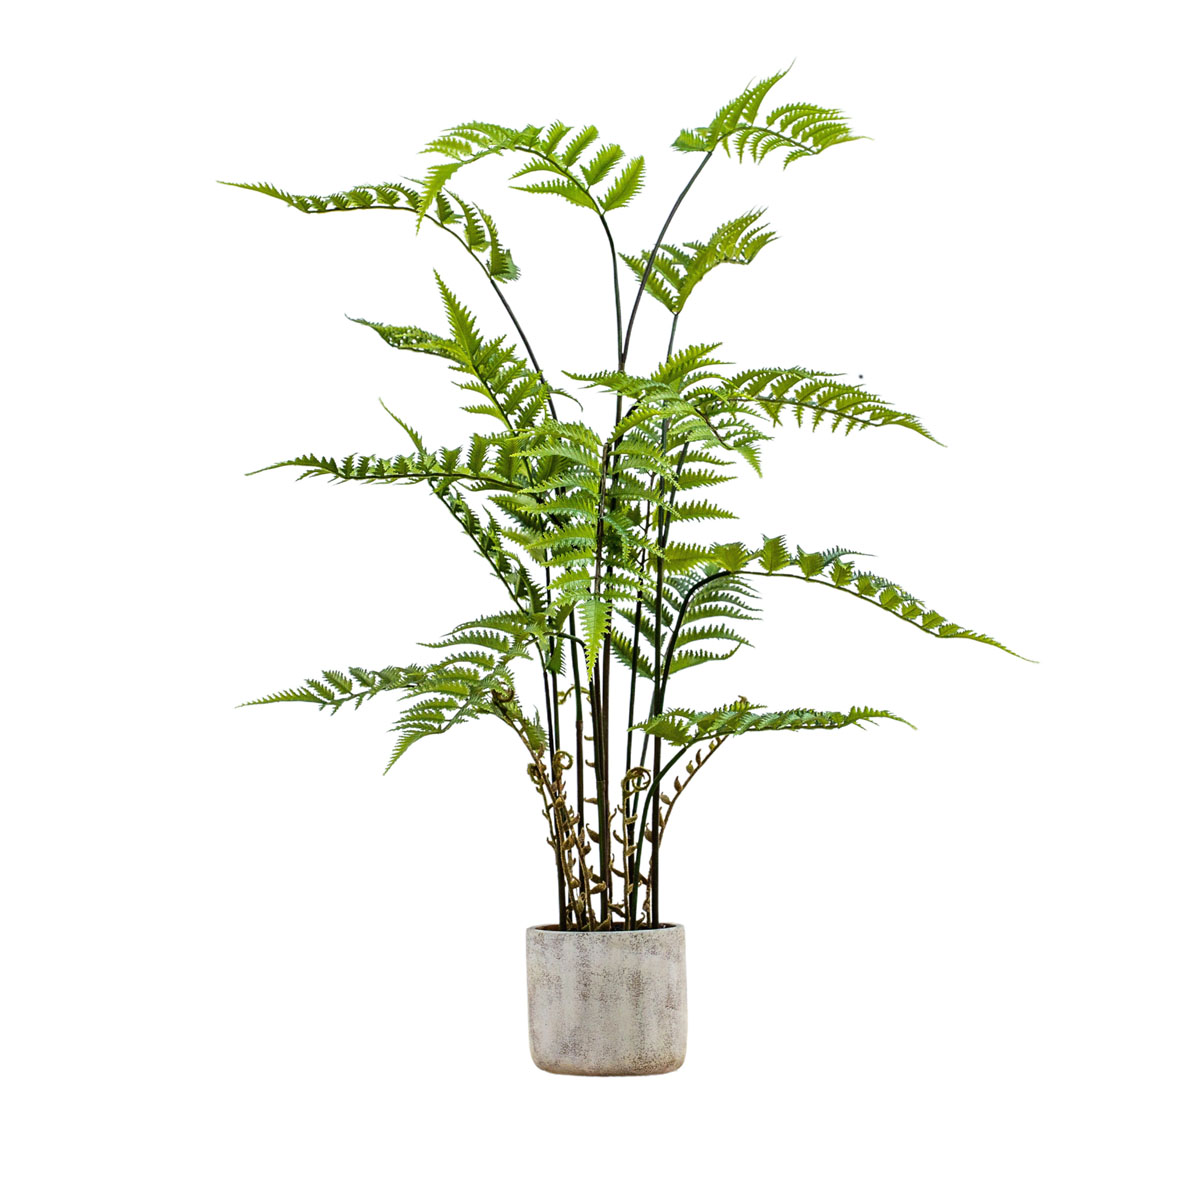 Potted Fern in Cement Pot H1060mm